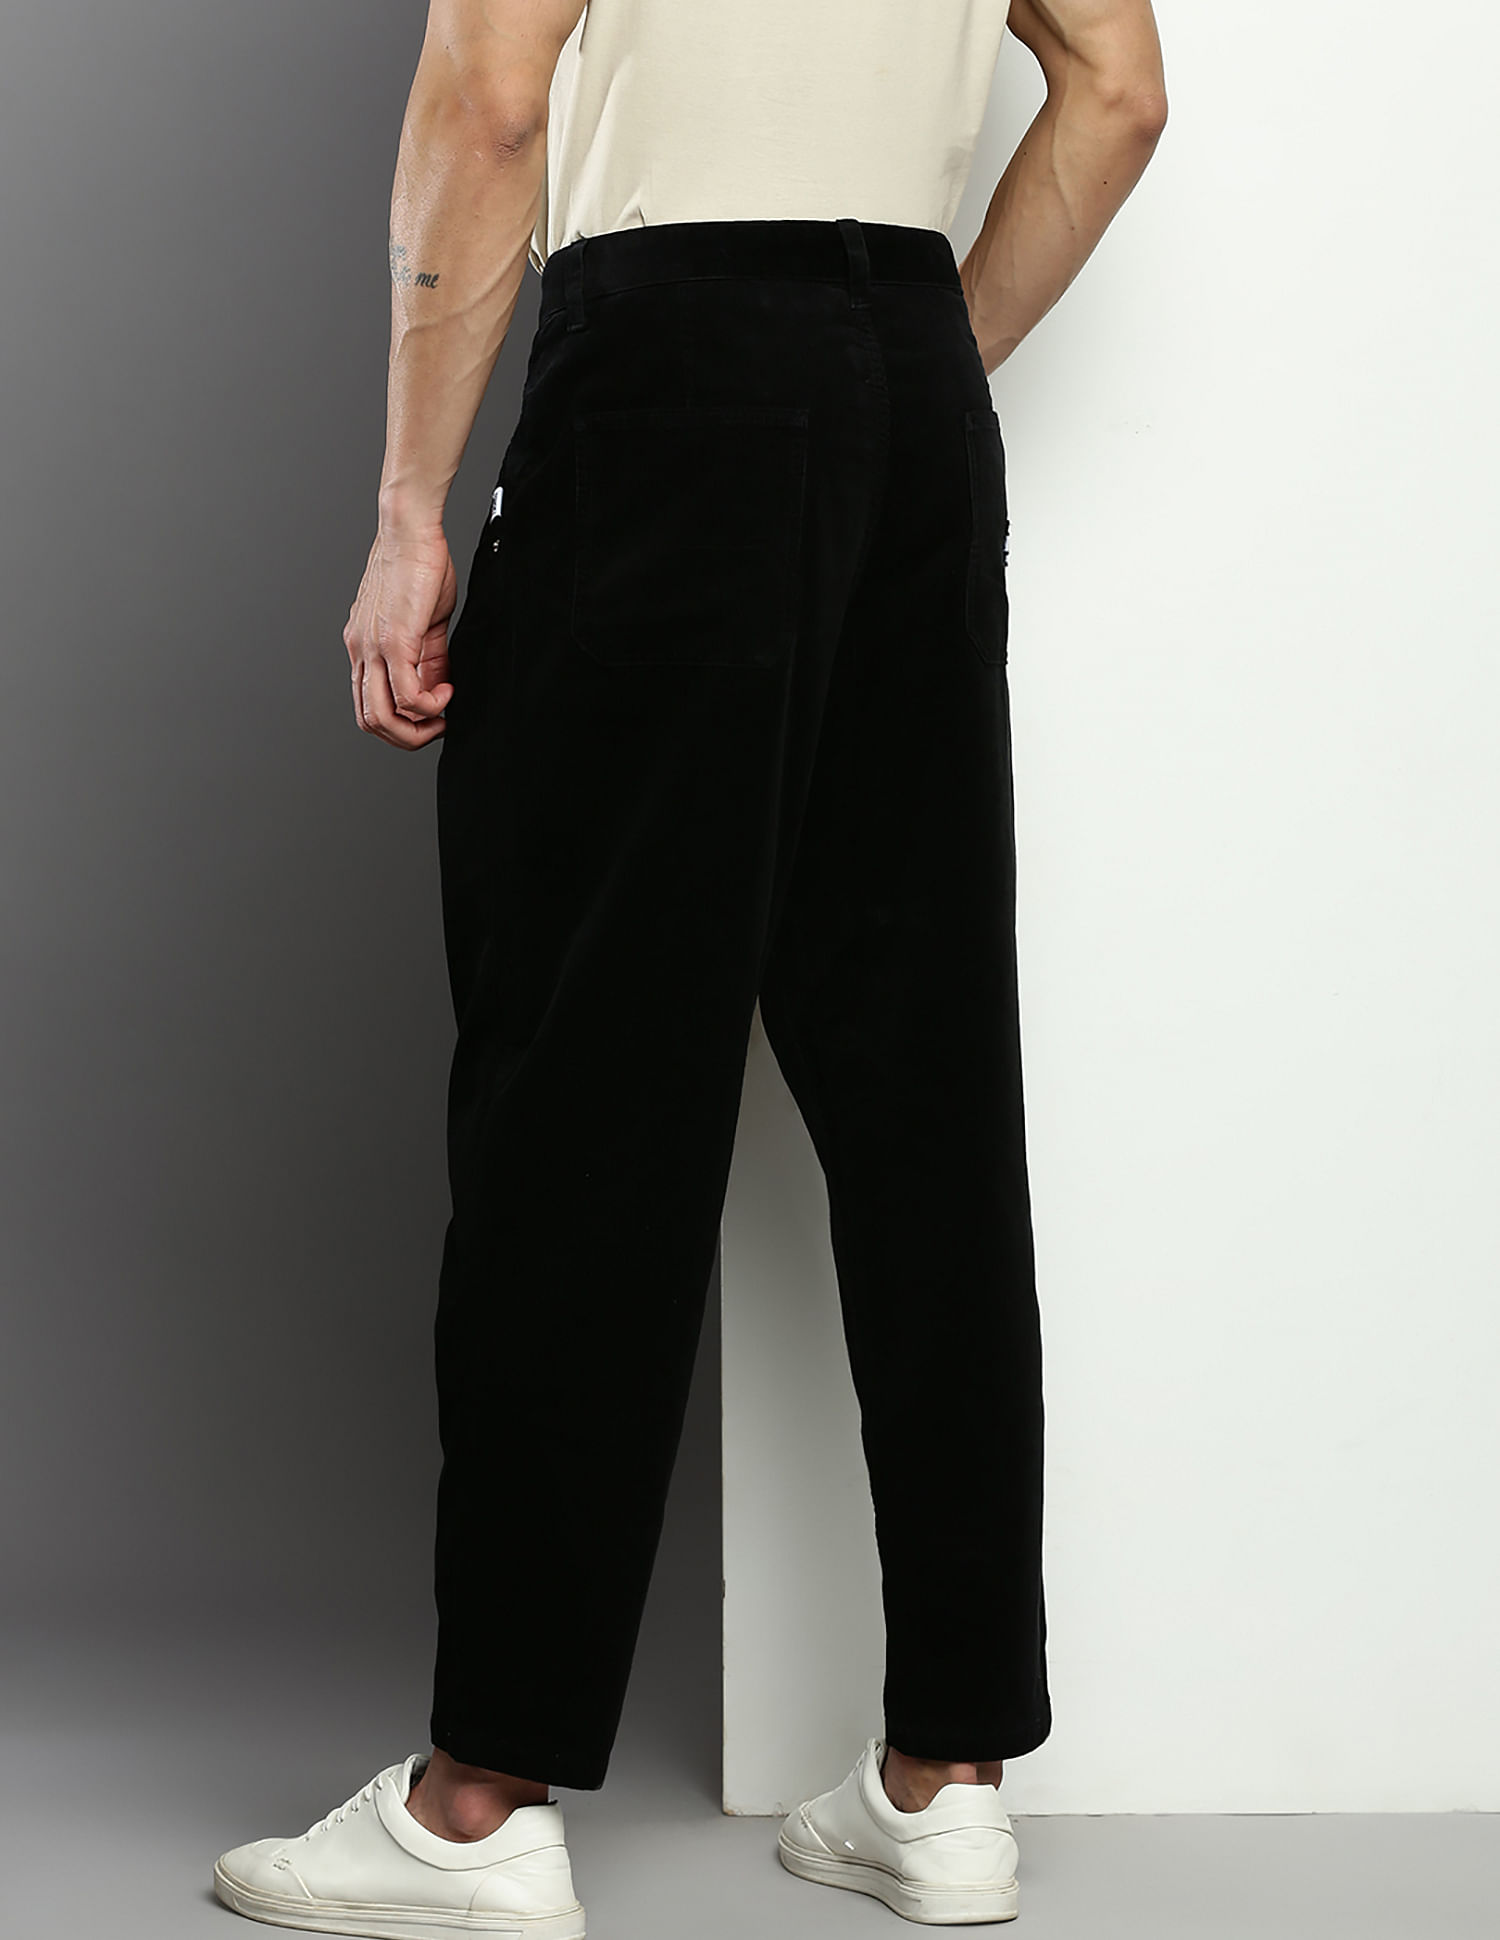 Slim Corduroy Kick Flare Trousers  Black  Corduroy Trousers   Other  Stories  Corduroy pants outfit Casual work outfits Fashion pants